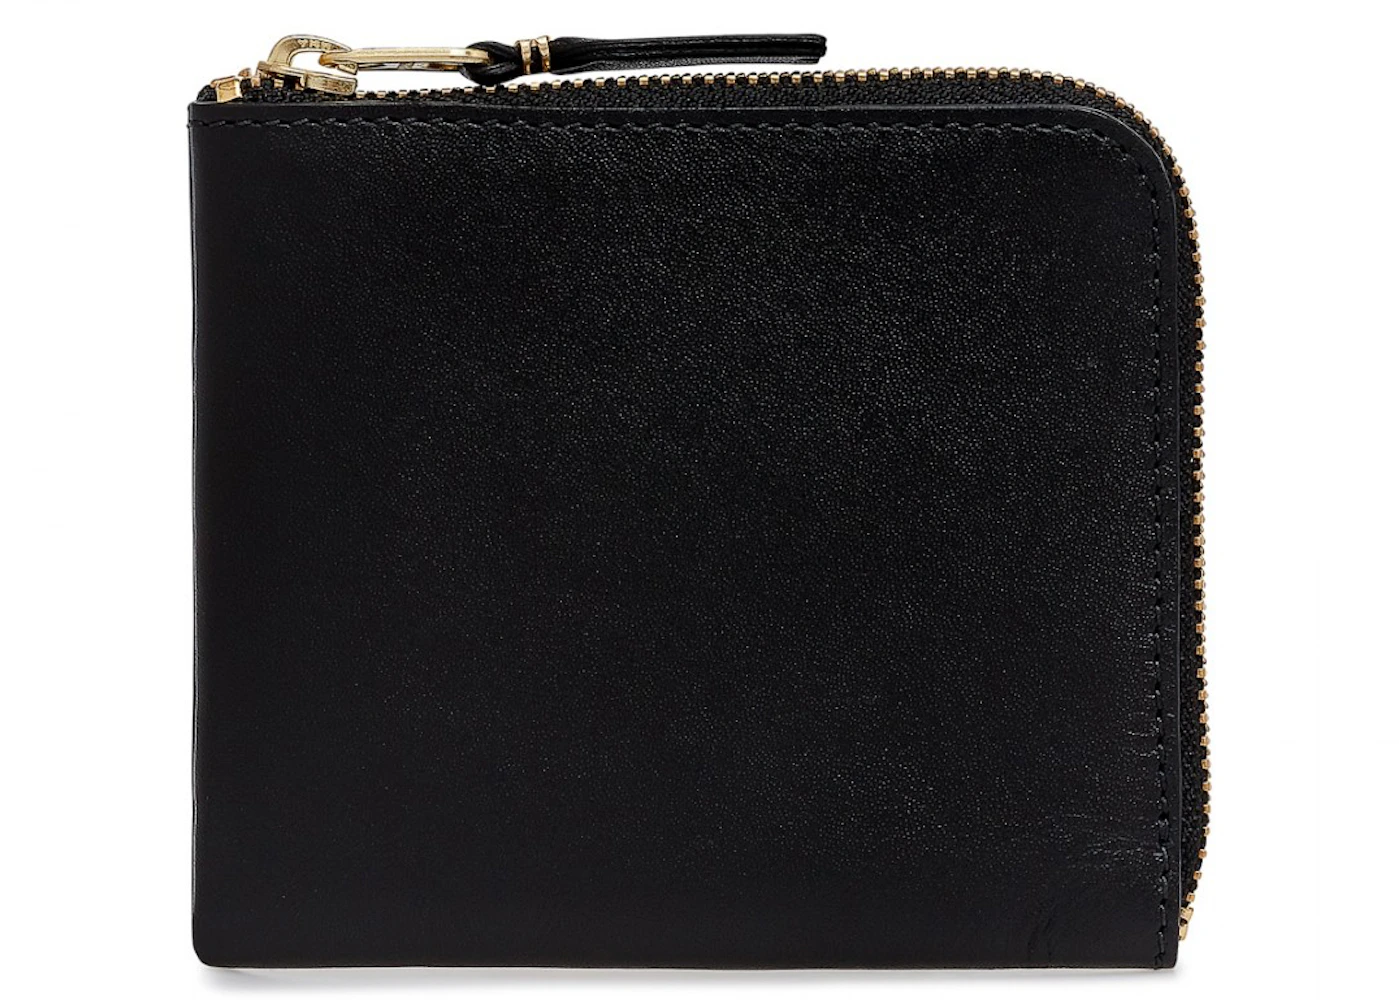 Comme des Garcons SA3100 Classic Plain Wallet Black in Leather with ...